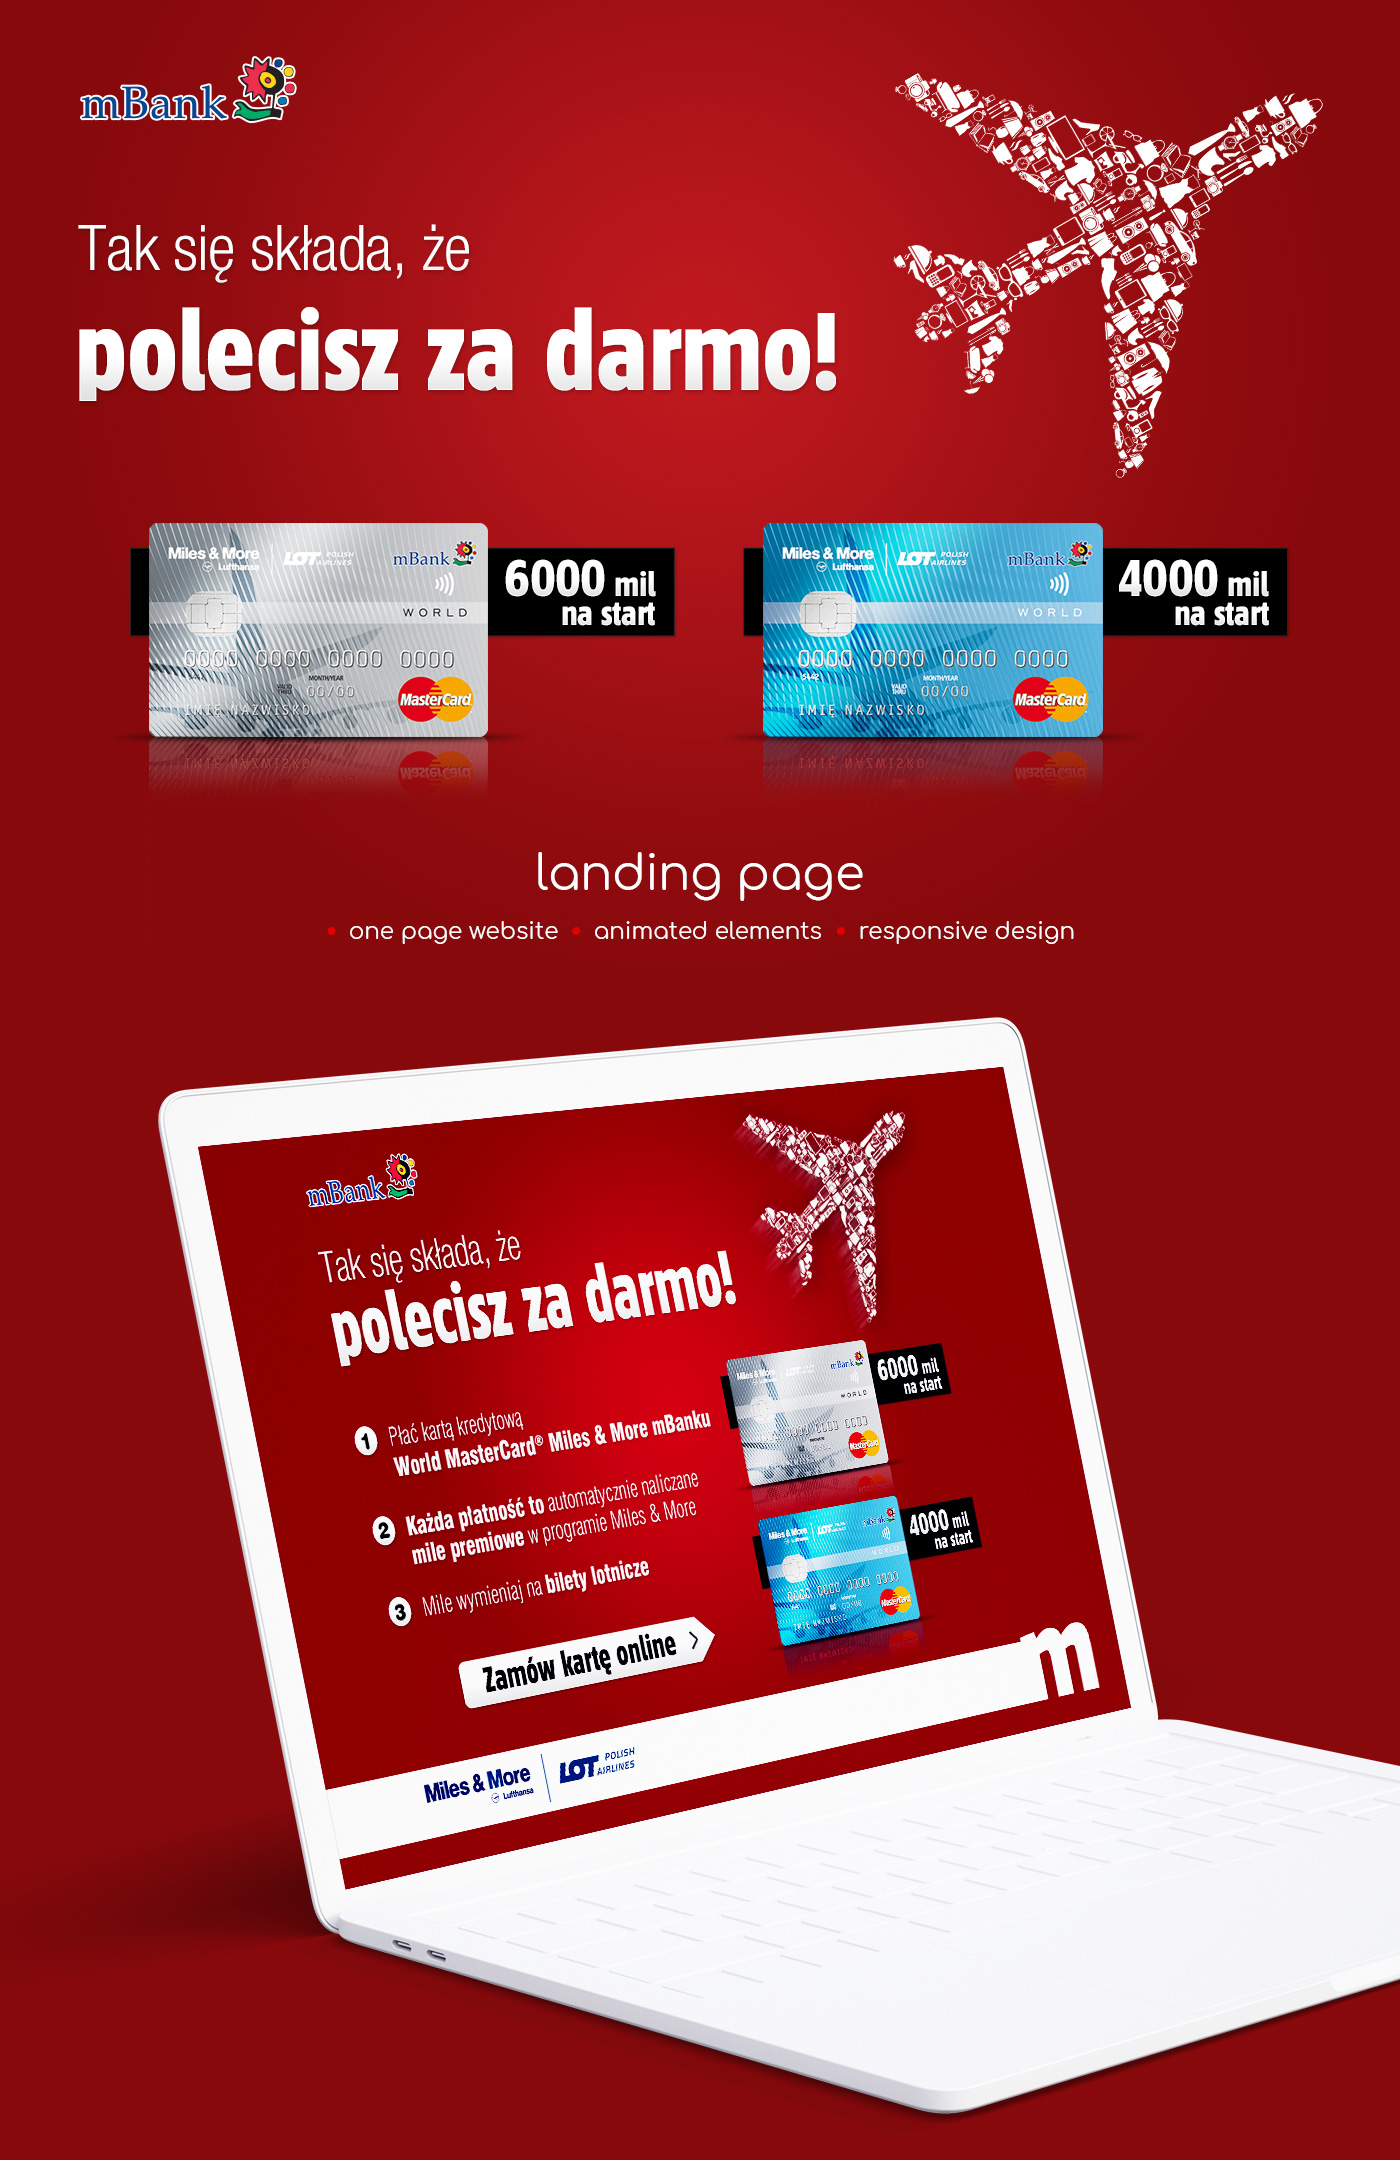 landing page and banner ads mBank